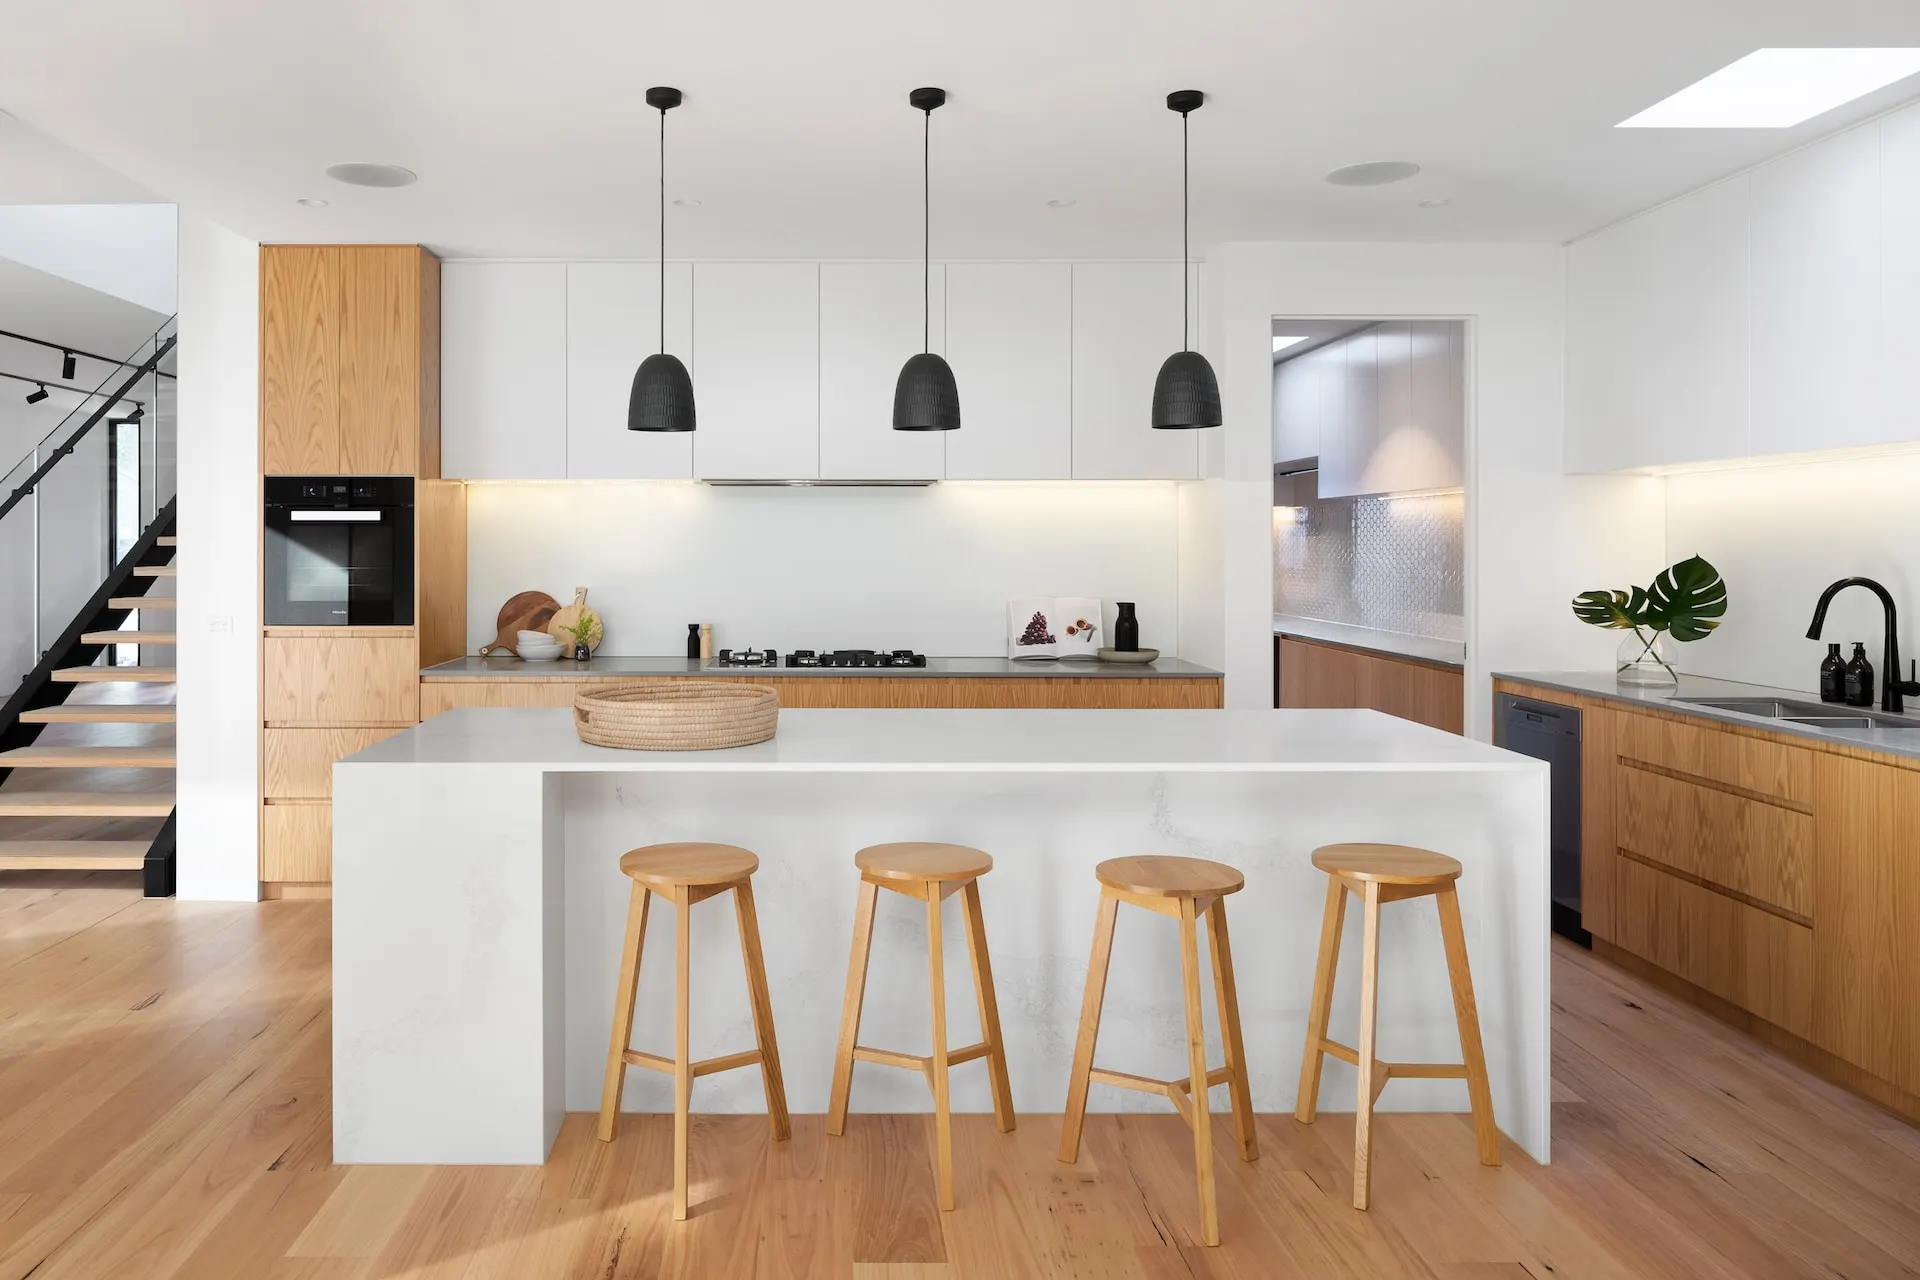 10 Things to Consider Before Renovating Your Kitchen